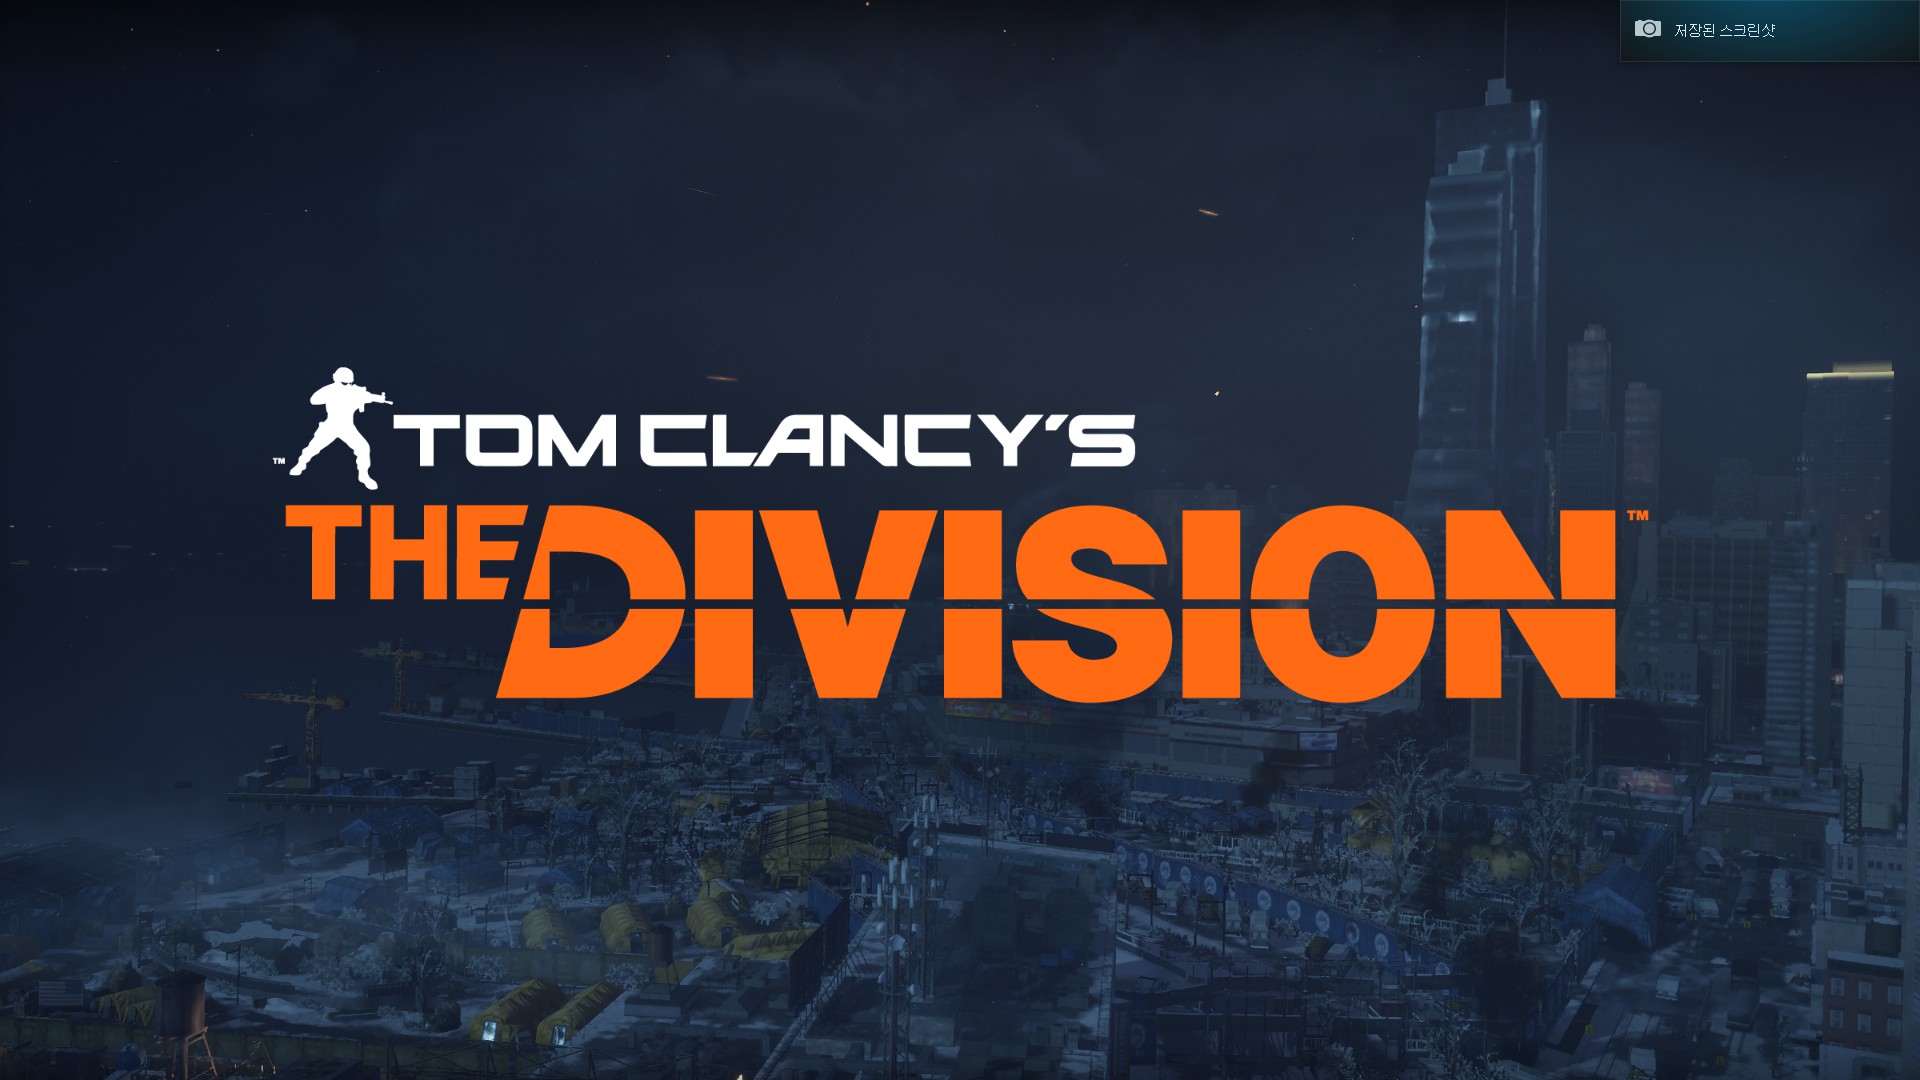 Tom Clancy's The Division™2016-3-8-19-53-51.jpg